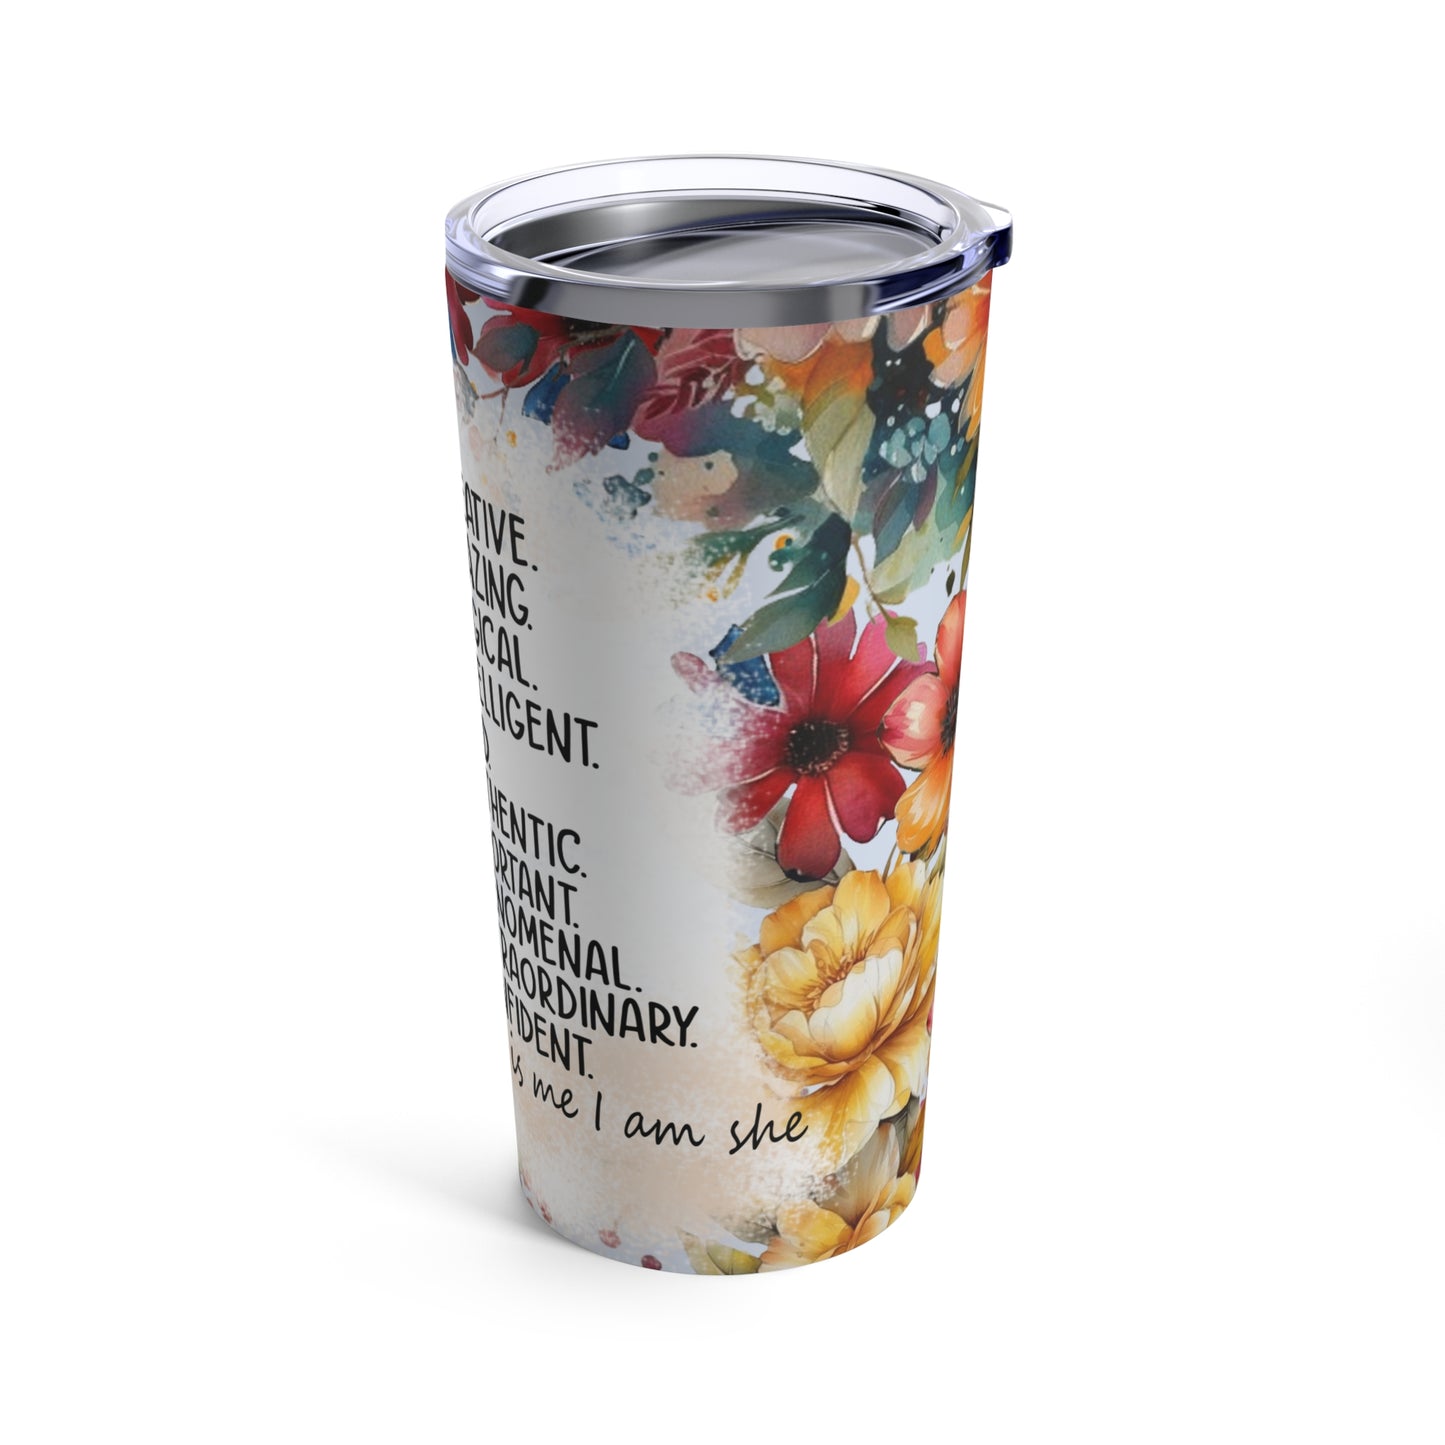 She is design #1, Mother's Day Gift, Wife, Sister, Significant Other, Girlfriend, Grandmother, Gift, Stainless Steel Tumbler 20oz